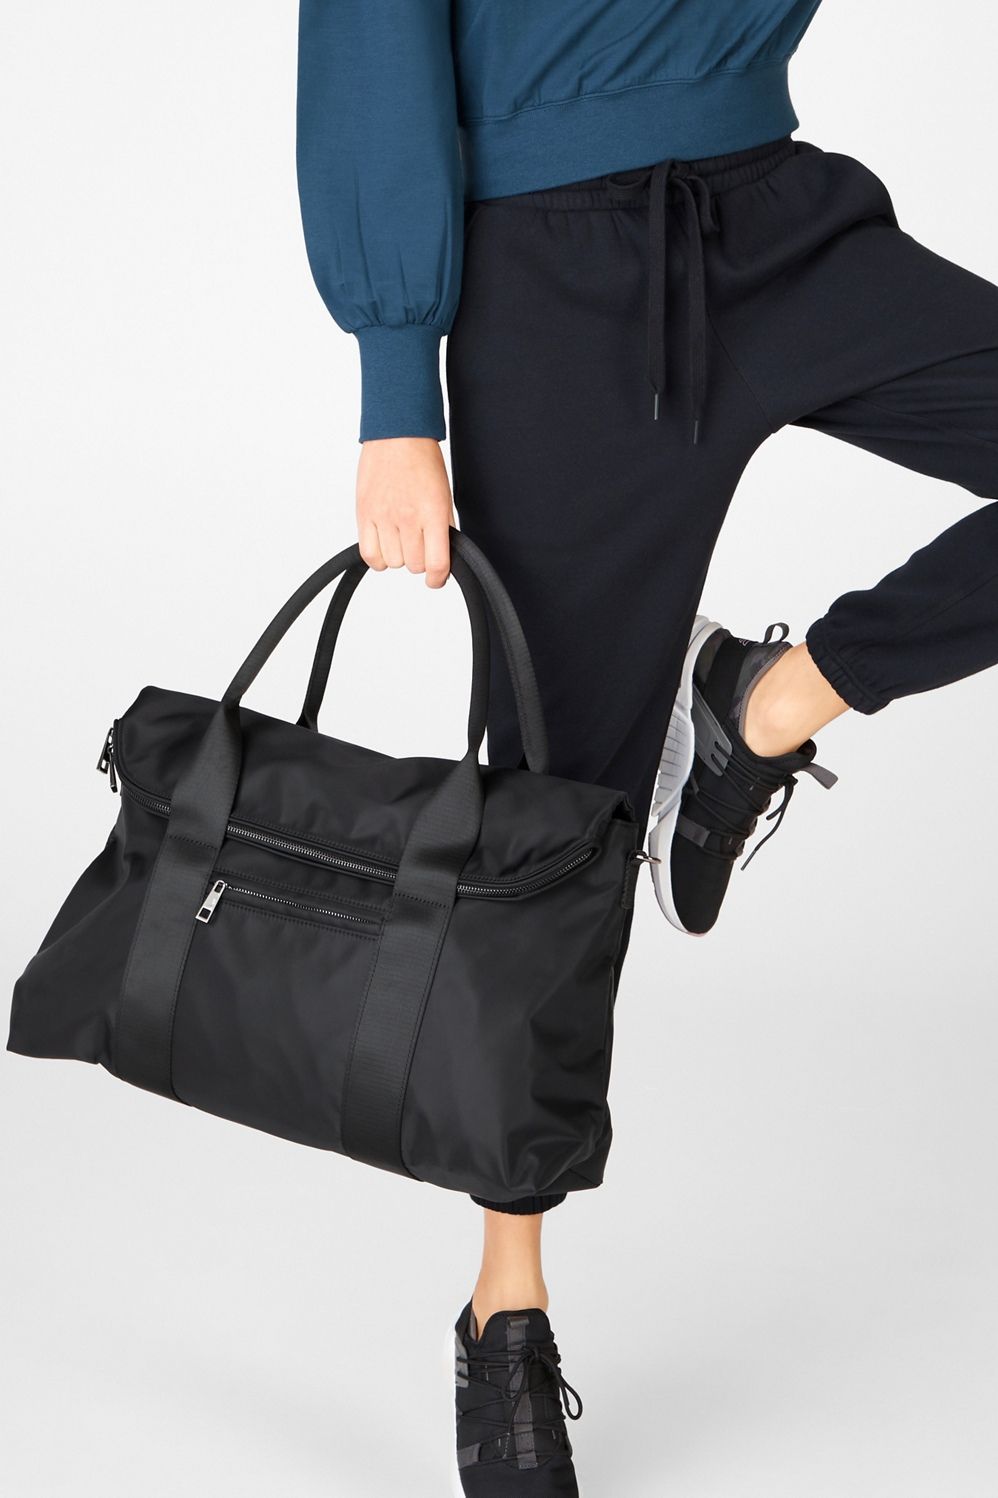 The Grip Pocket Tote | Fabletics